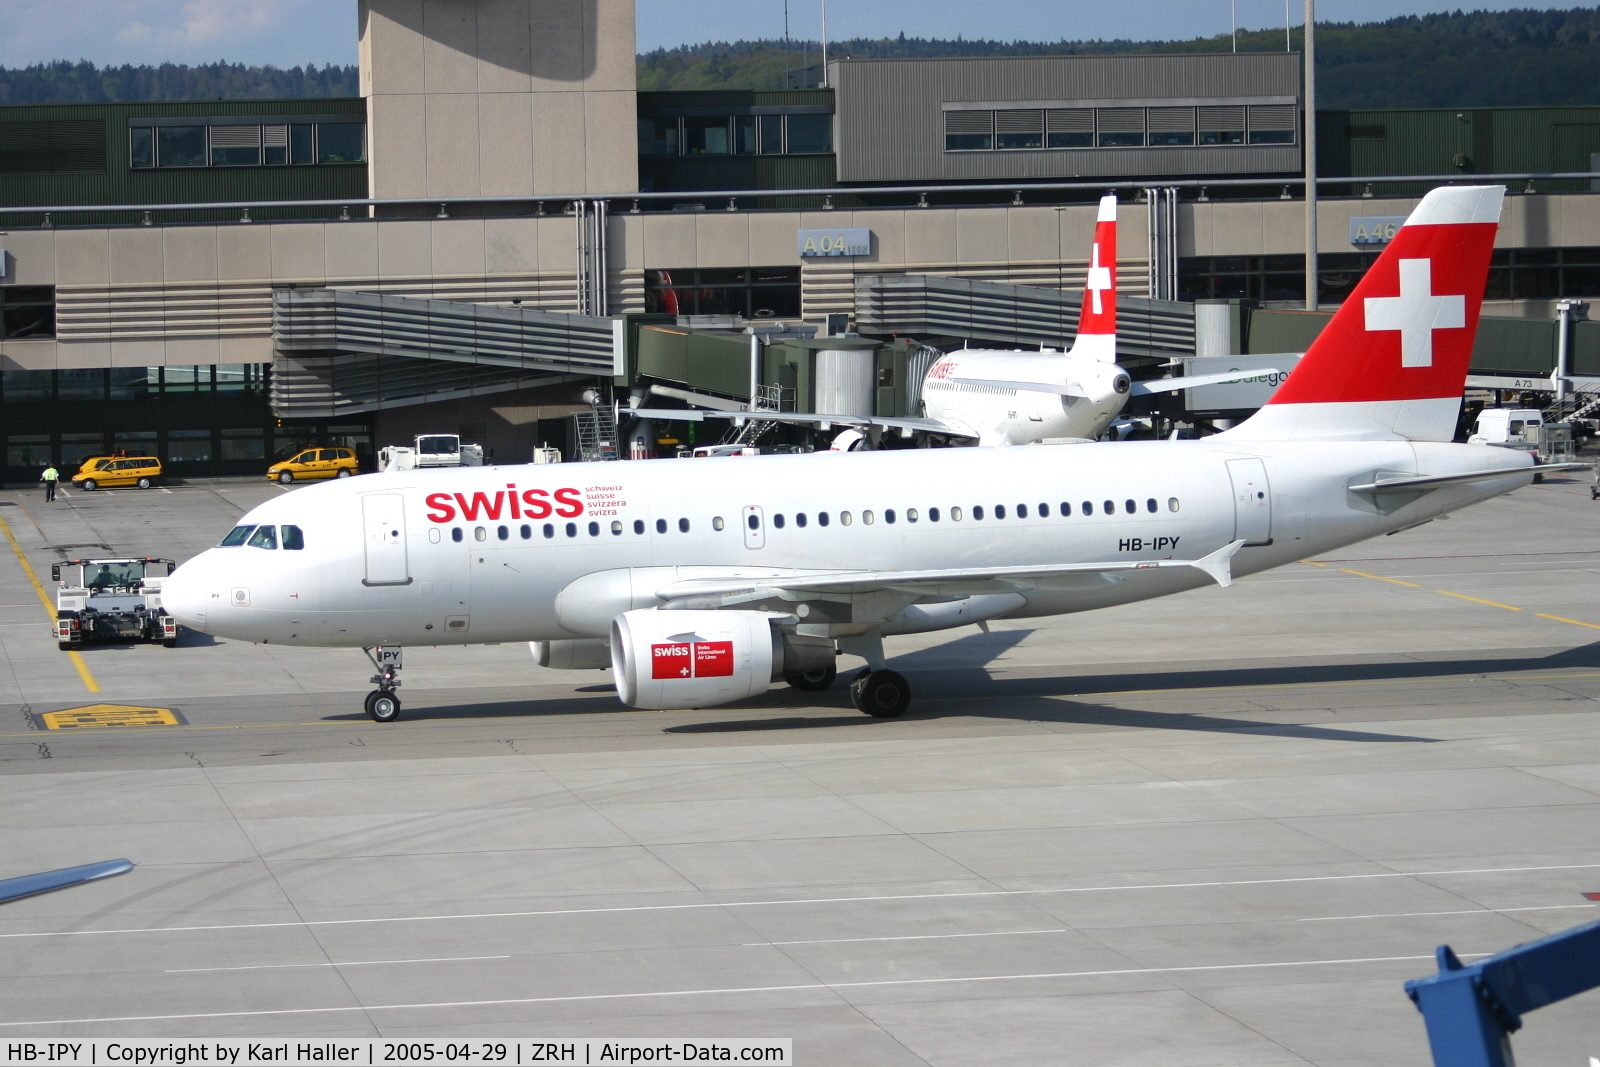 HB-IPY, 1996 Airbus A319-112 C/N 621, ready for Taxi on Zurich Airport, Switzerland